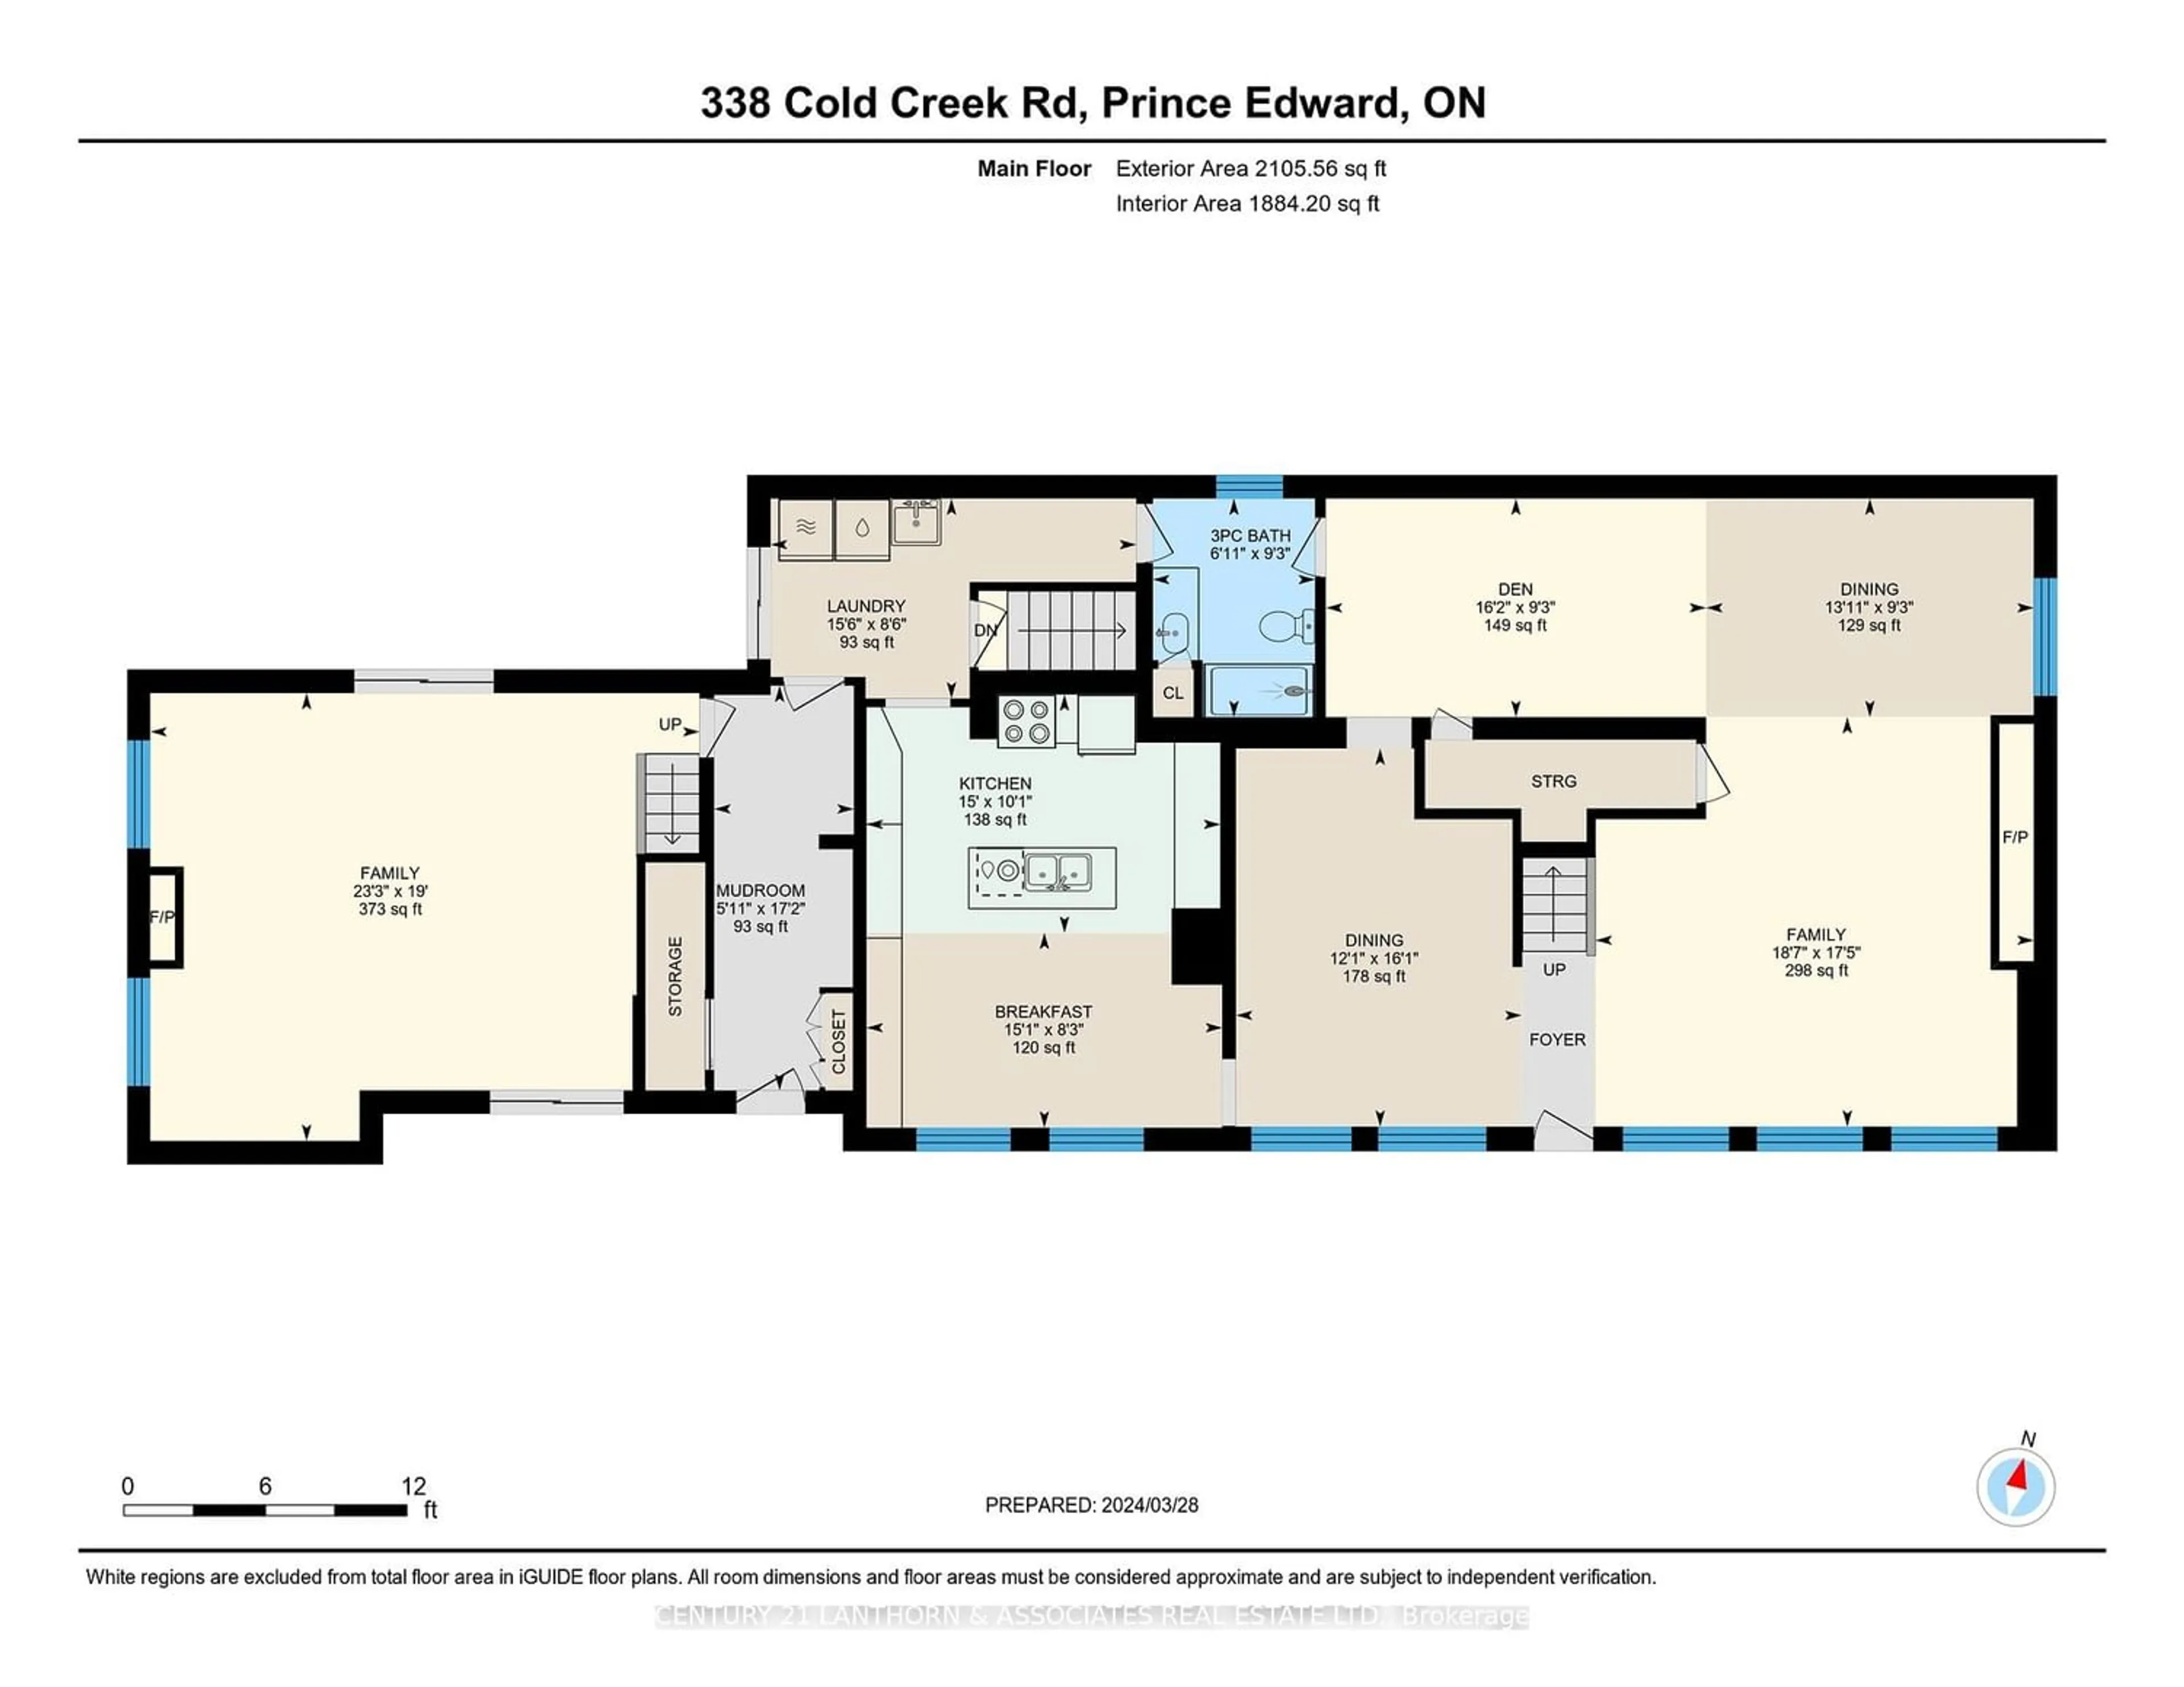 Floor plan for 338 Cold Creek Rd, Prince Edward County Ontario K0K 3L0